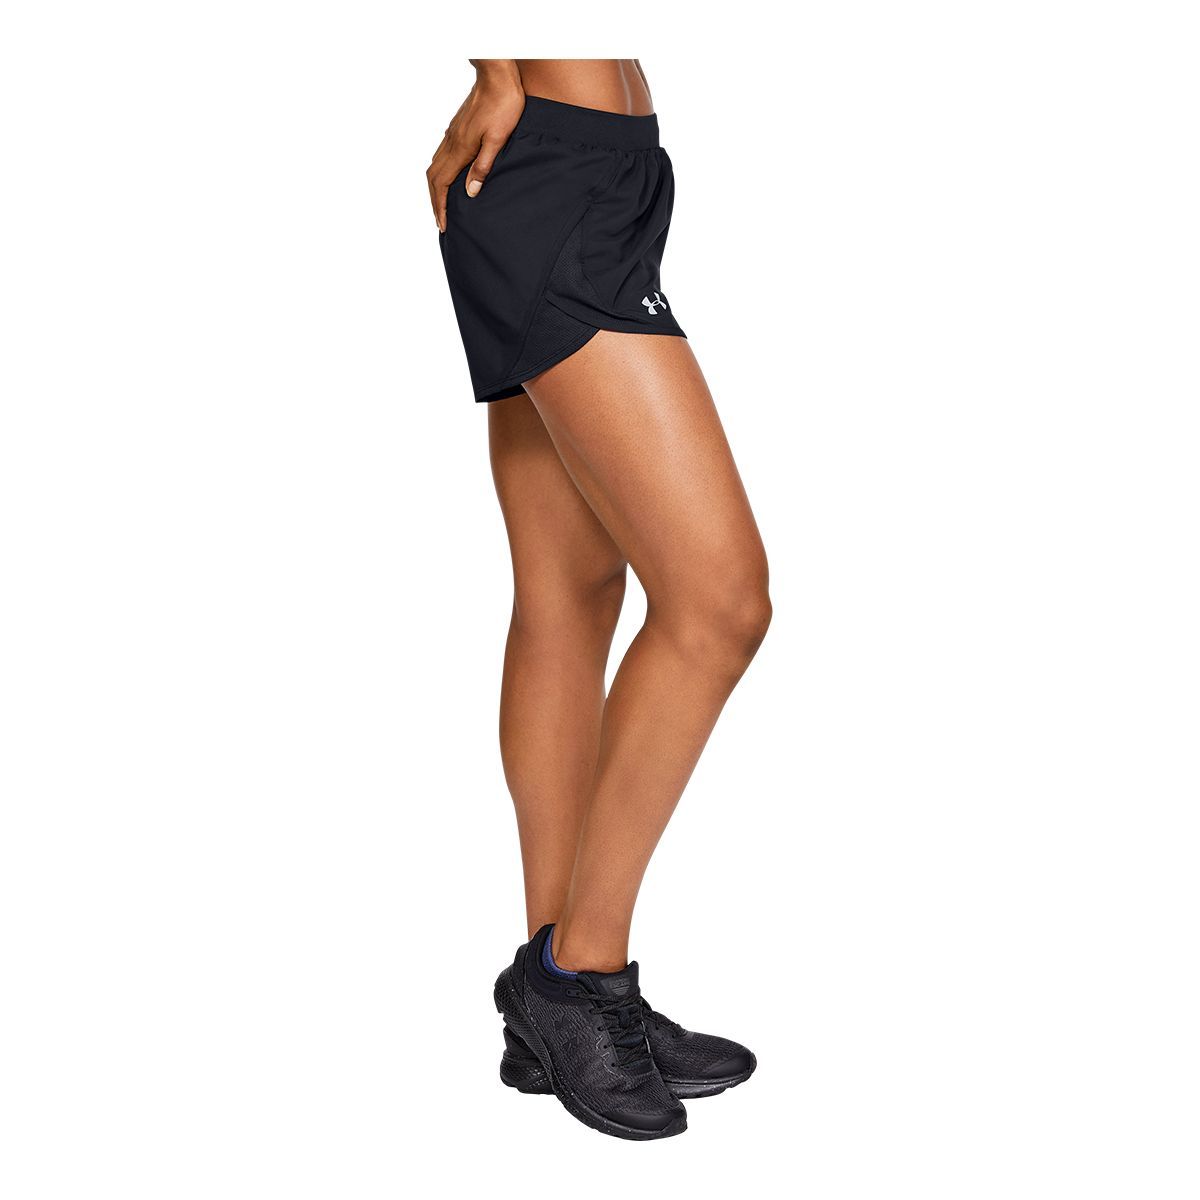 Under armour Play Up 2.0 Women's Shorts, Black - Size MD for sale online